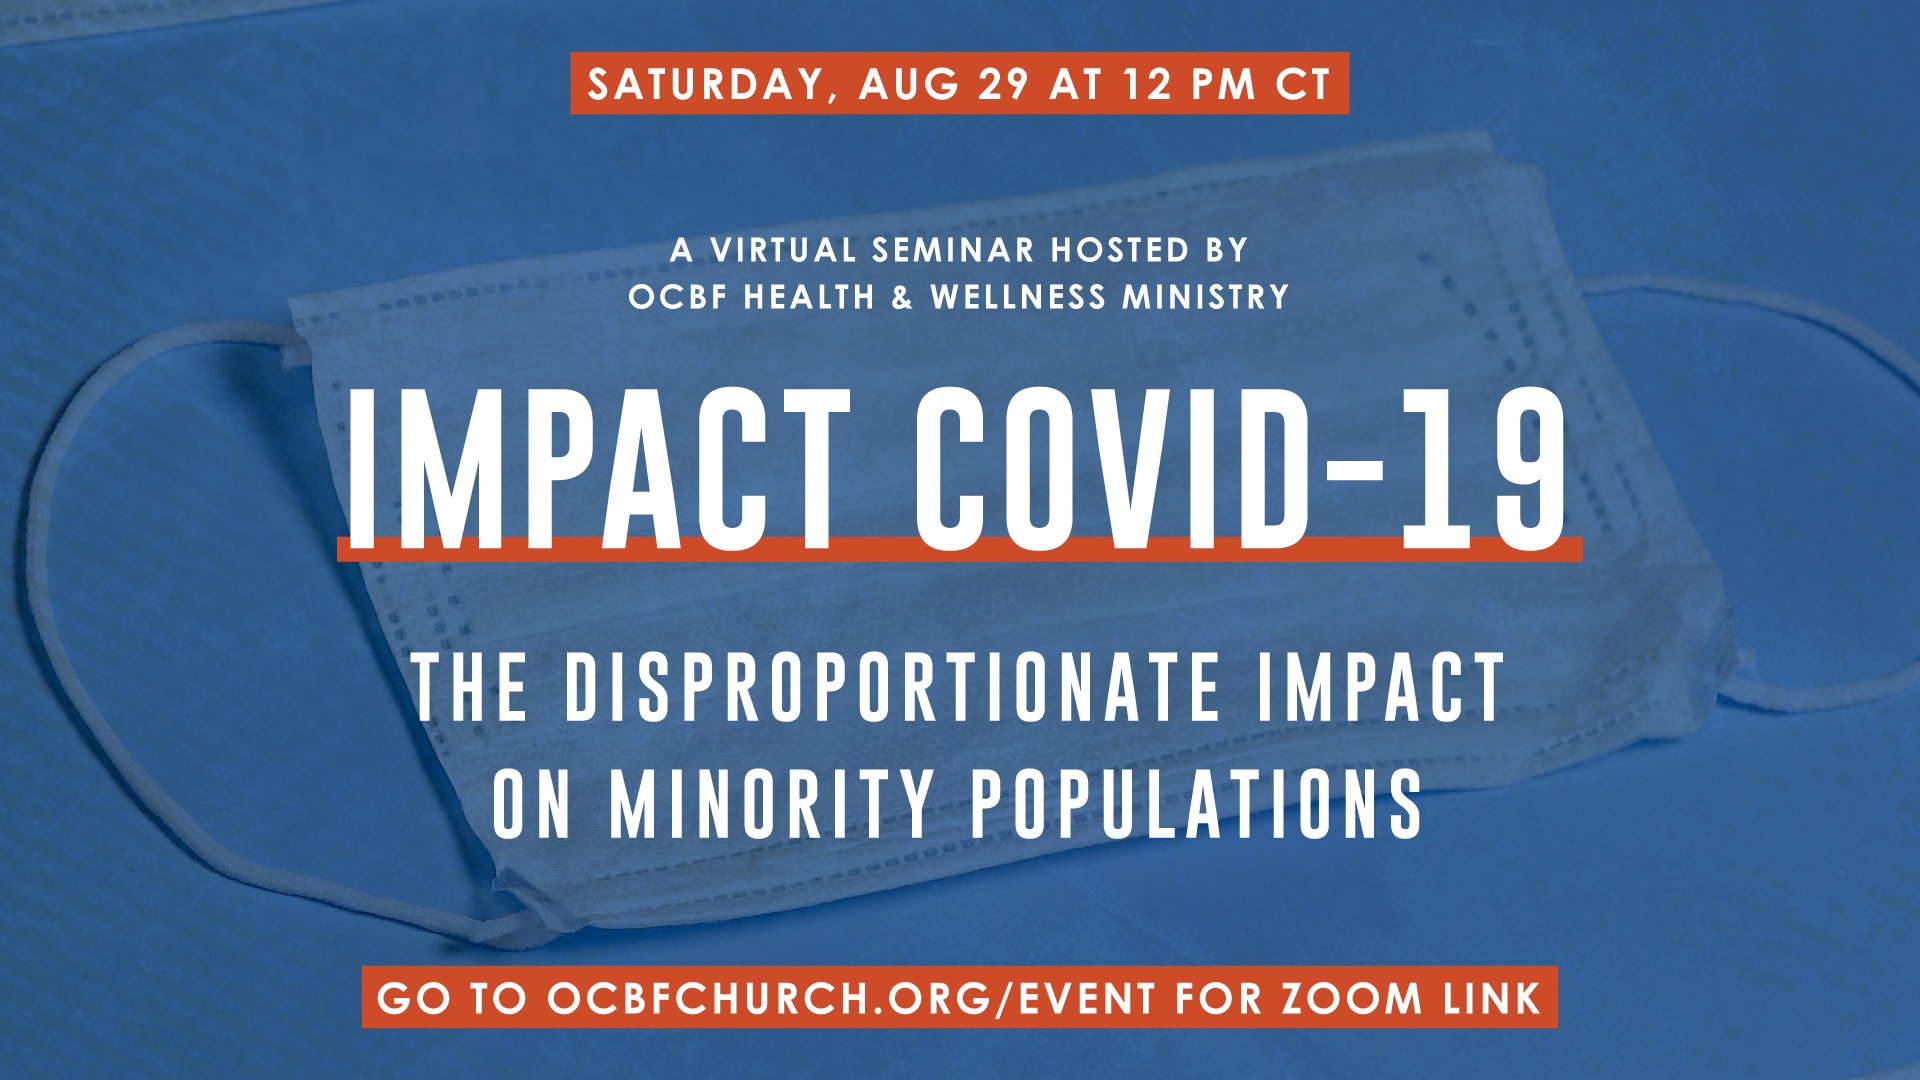 Learn about the effects of the Coronavirus at The Disproportionate Impact of COVID-19 on Minority Populations